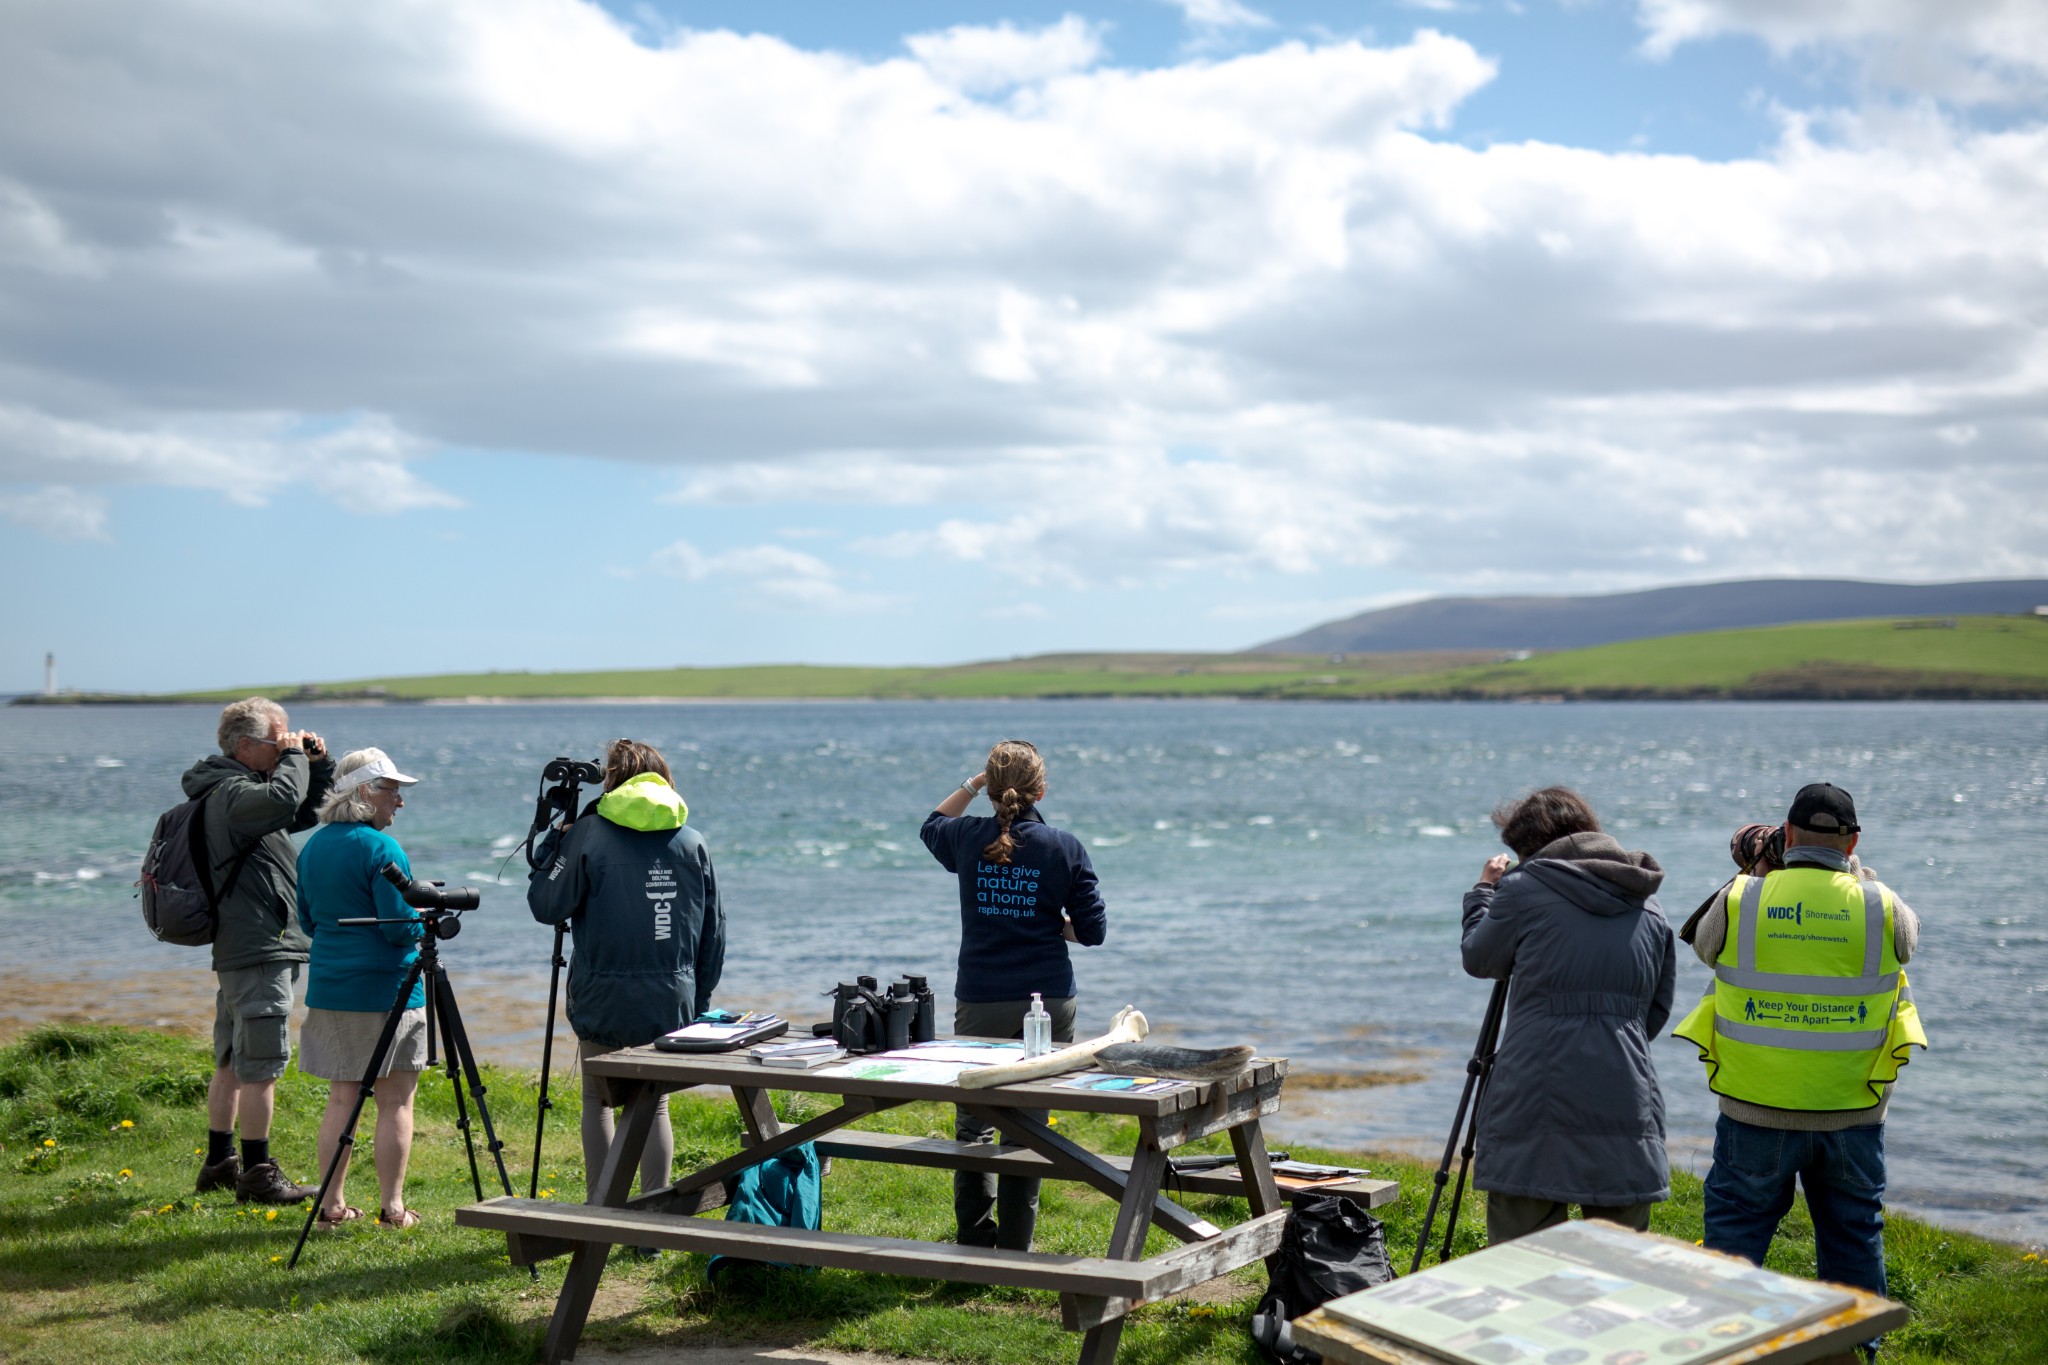 Shorewatch event at the Orkney Nature Festival